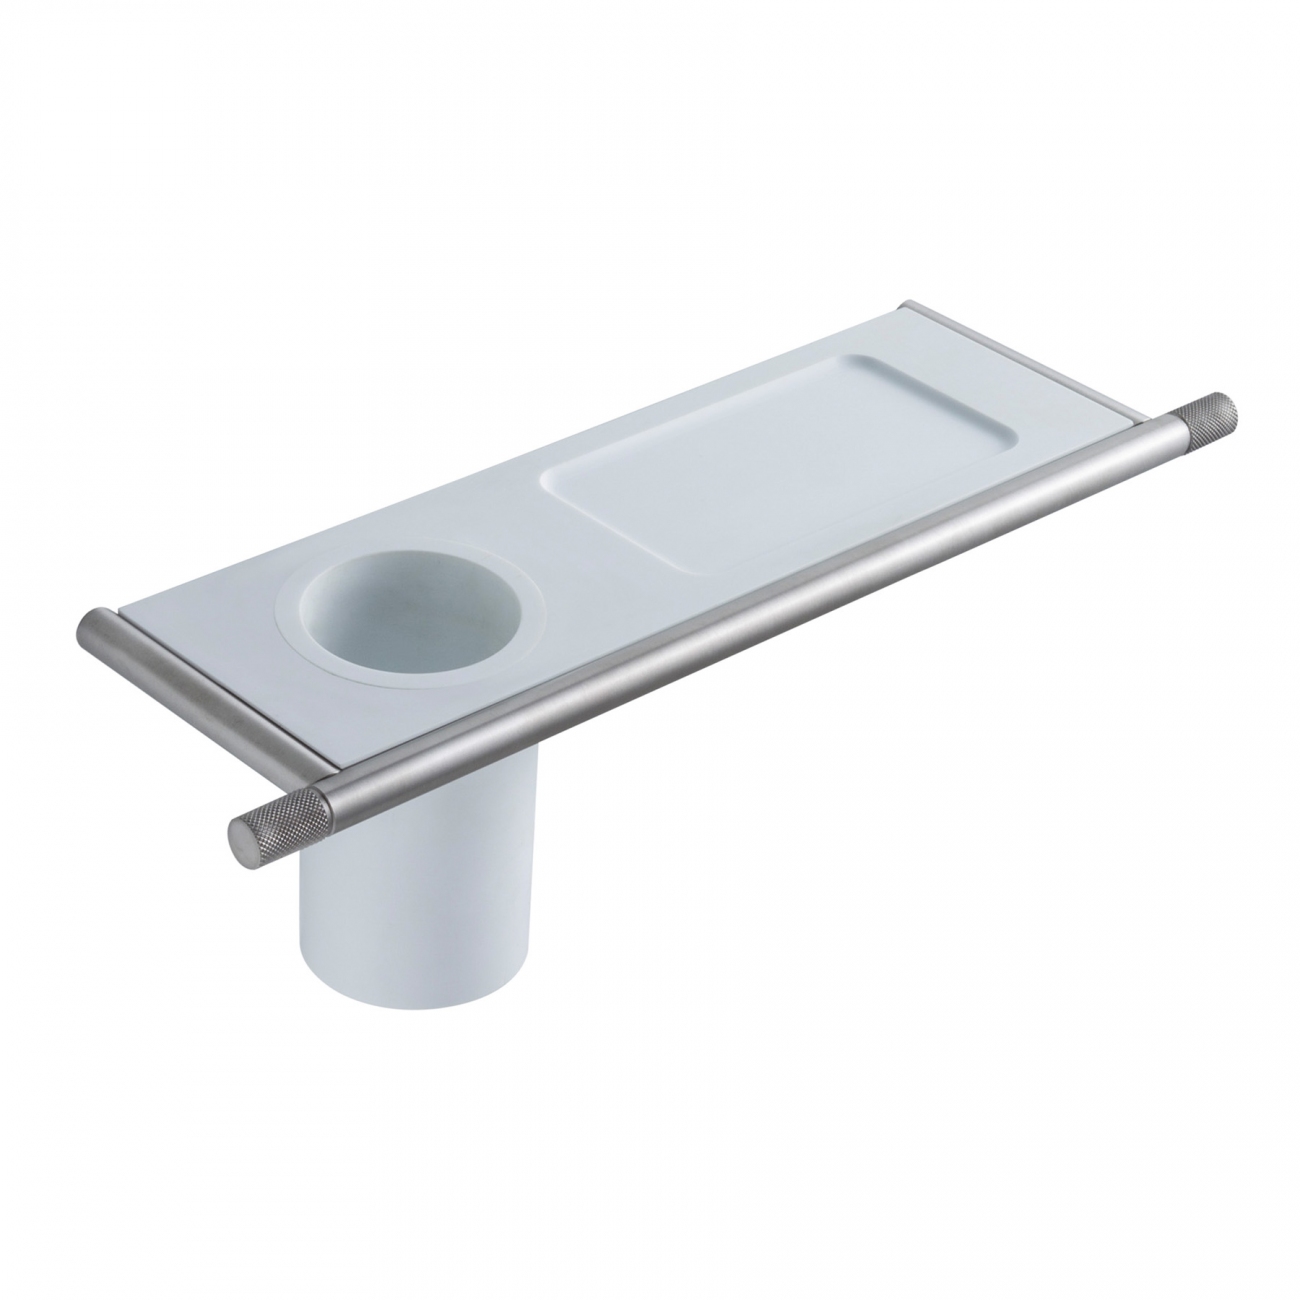 Treemme 22mm glass holder with shelf